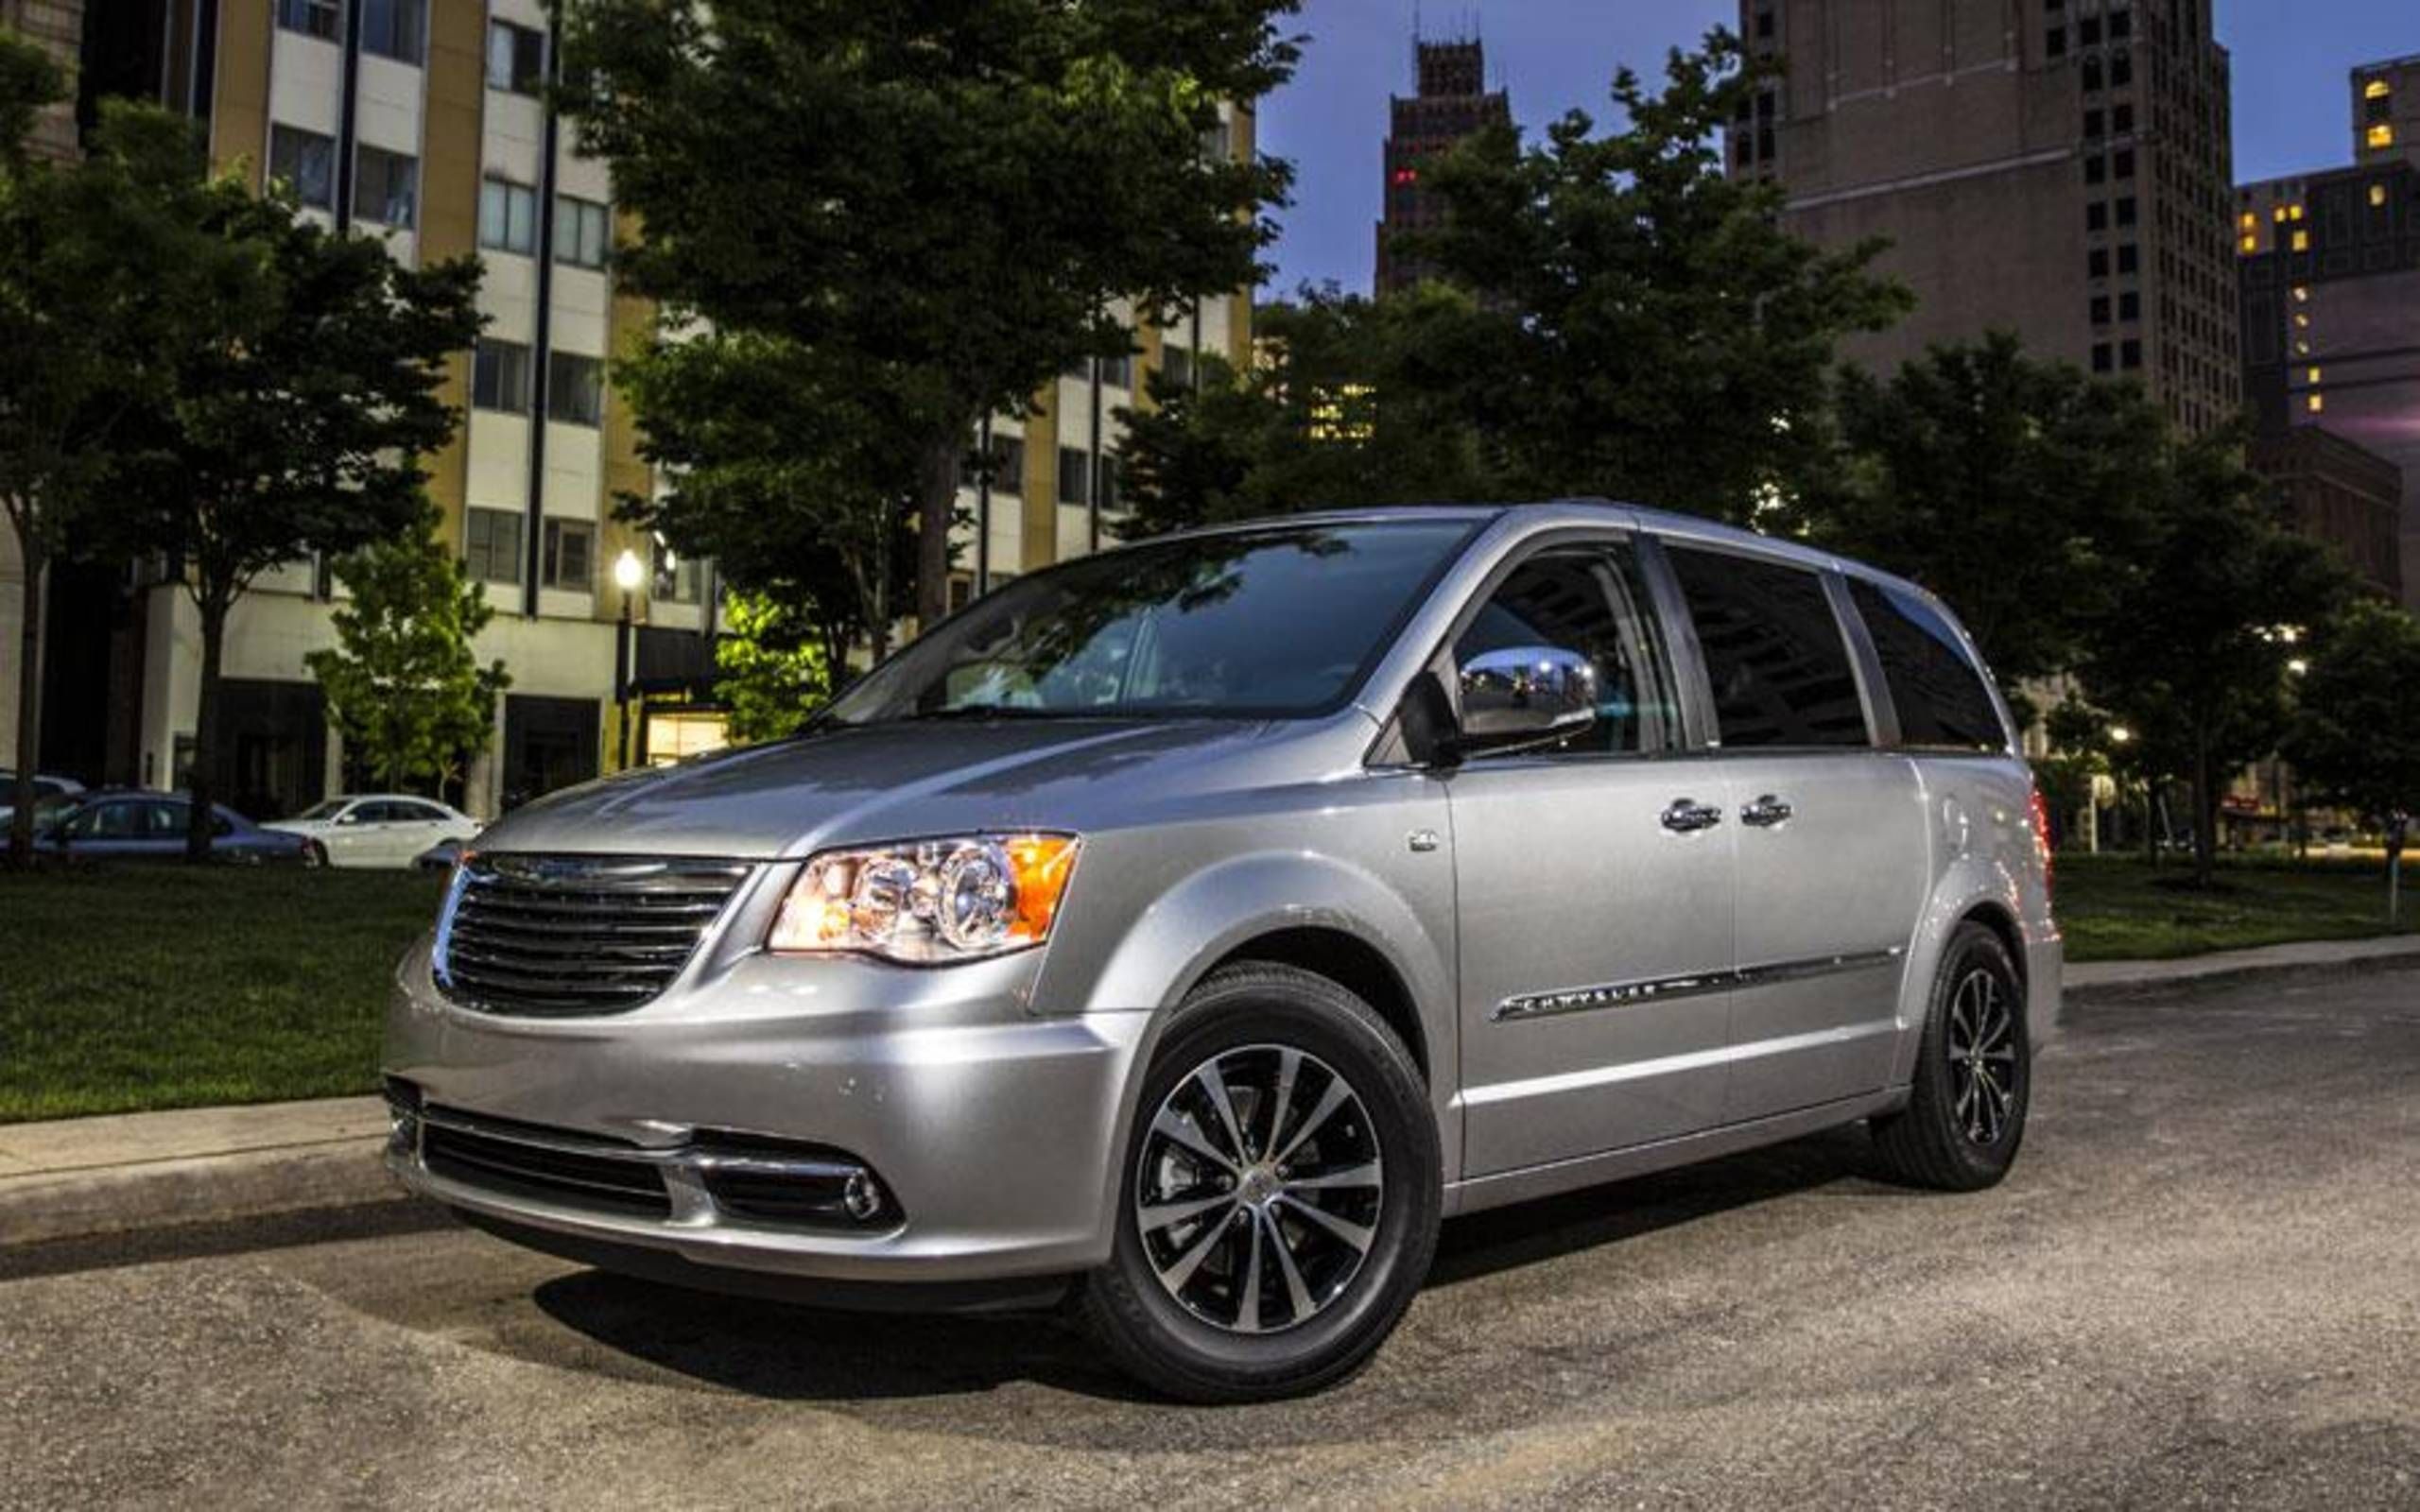 2014 Chrysler Town & Country S review notes